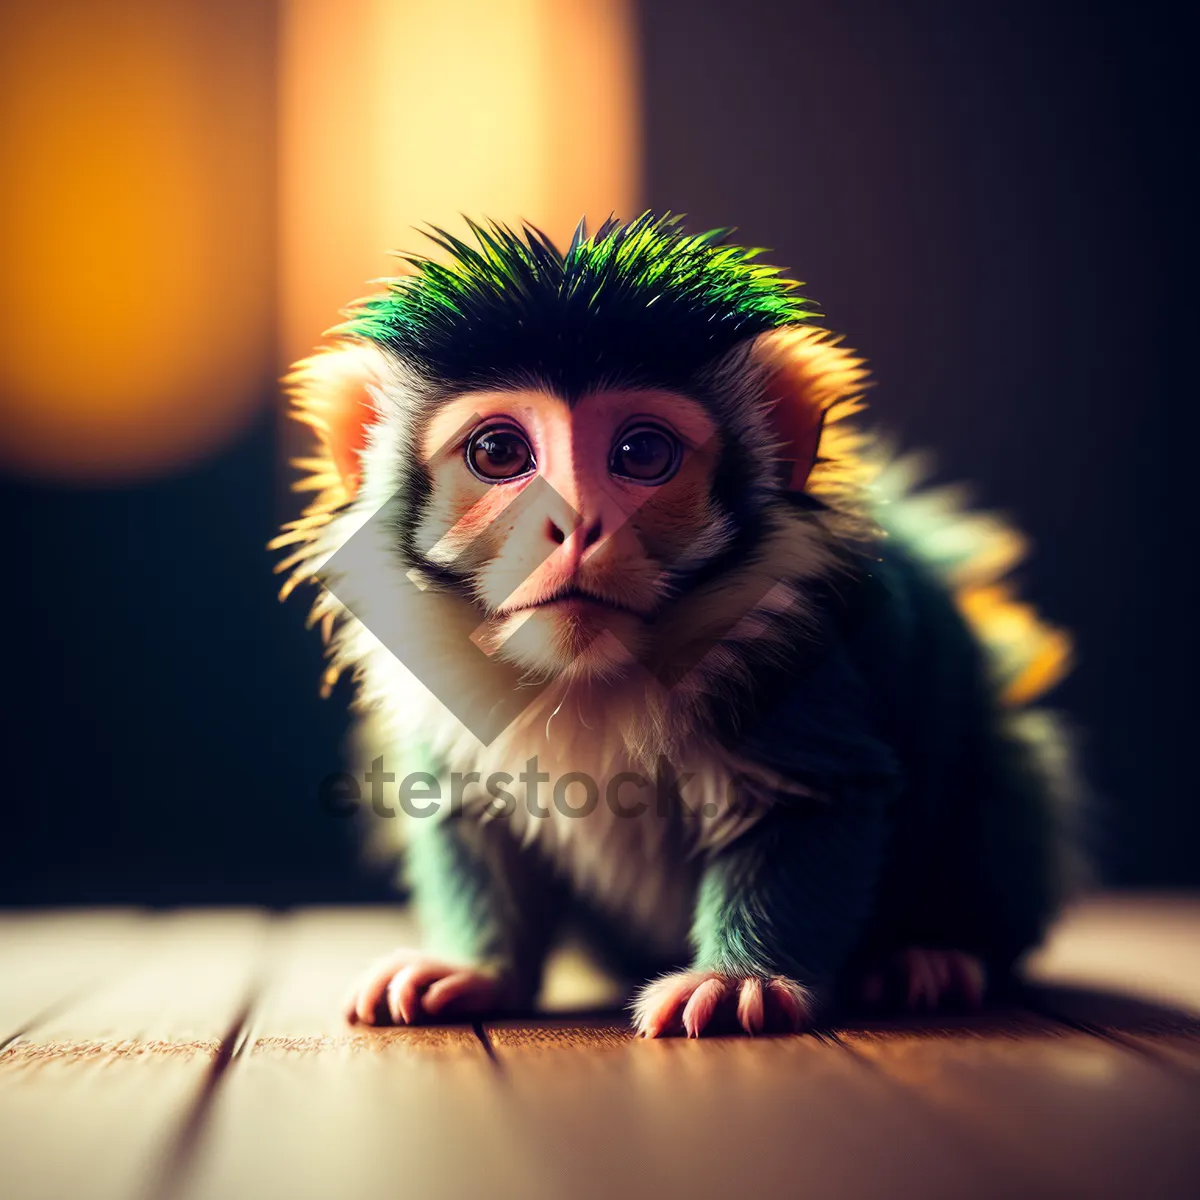 Picture of Adorable primate portrait featuring cute, wild monkey